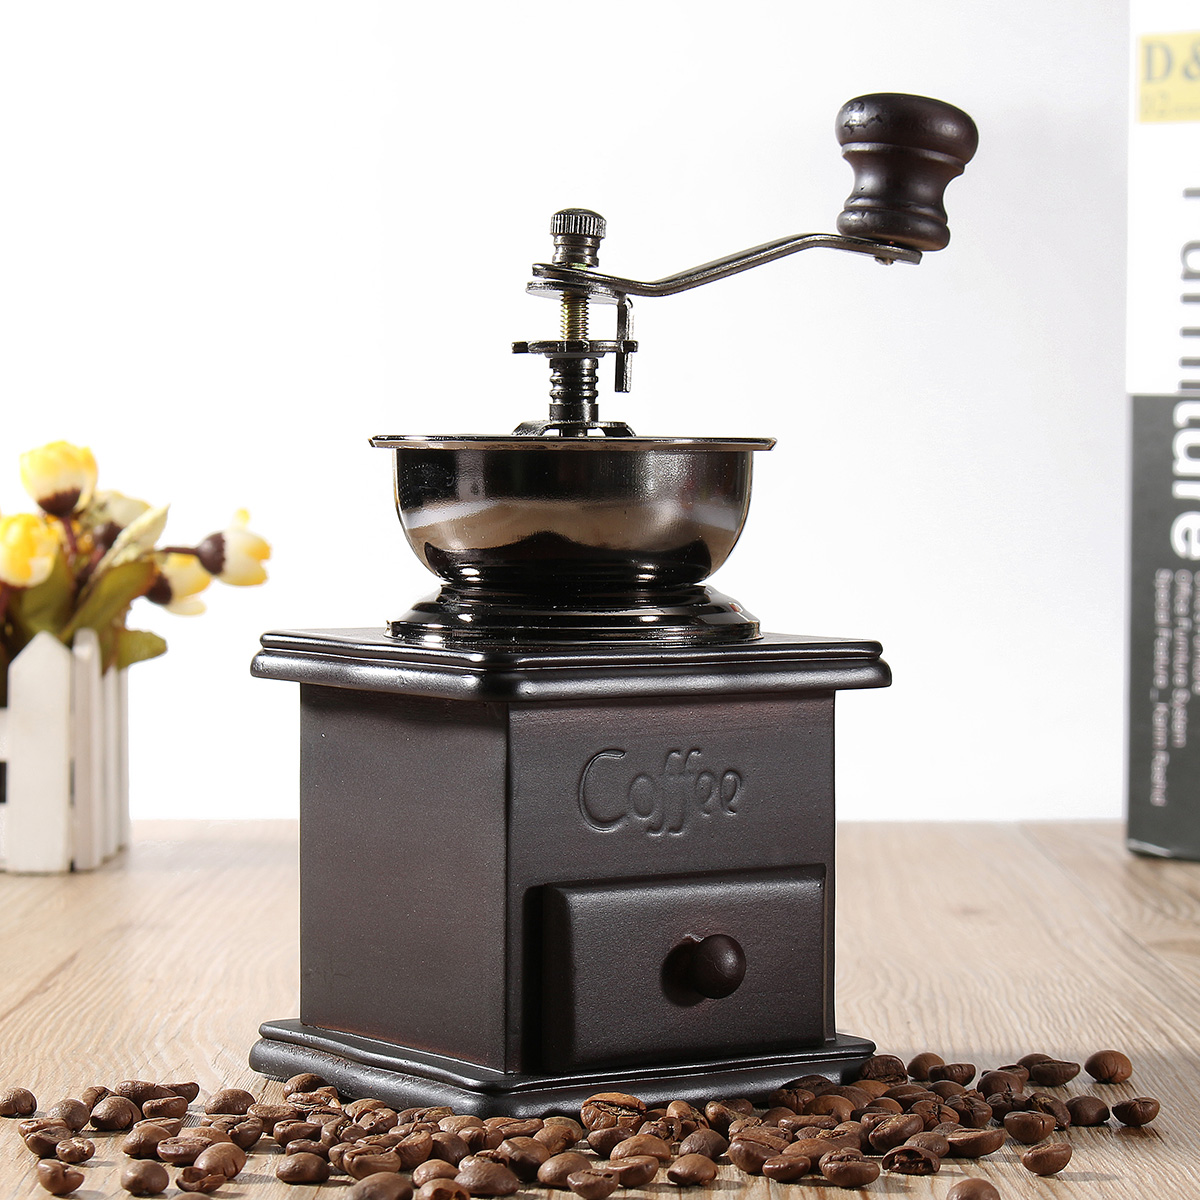 Manual-Coffee-Bean-Grinder-Spice-Herbs-Vintage-Retro-Hand-Grinding-Tool-Wooden-Burr-Mill-1352655